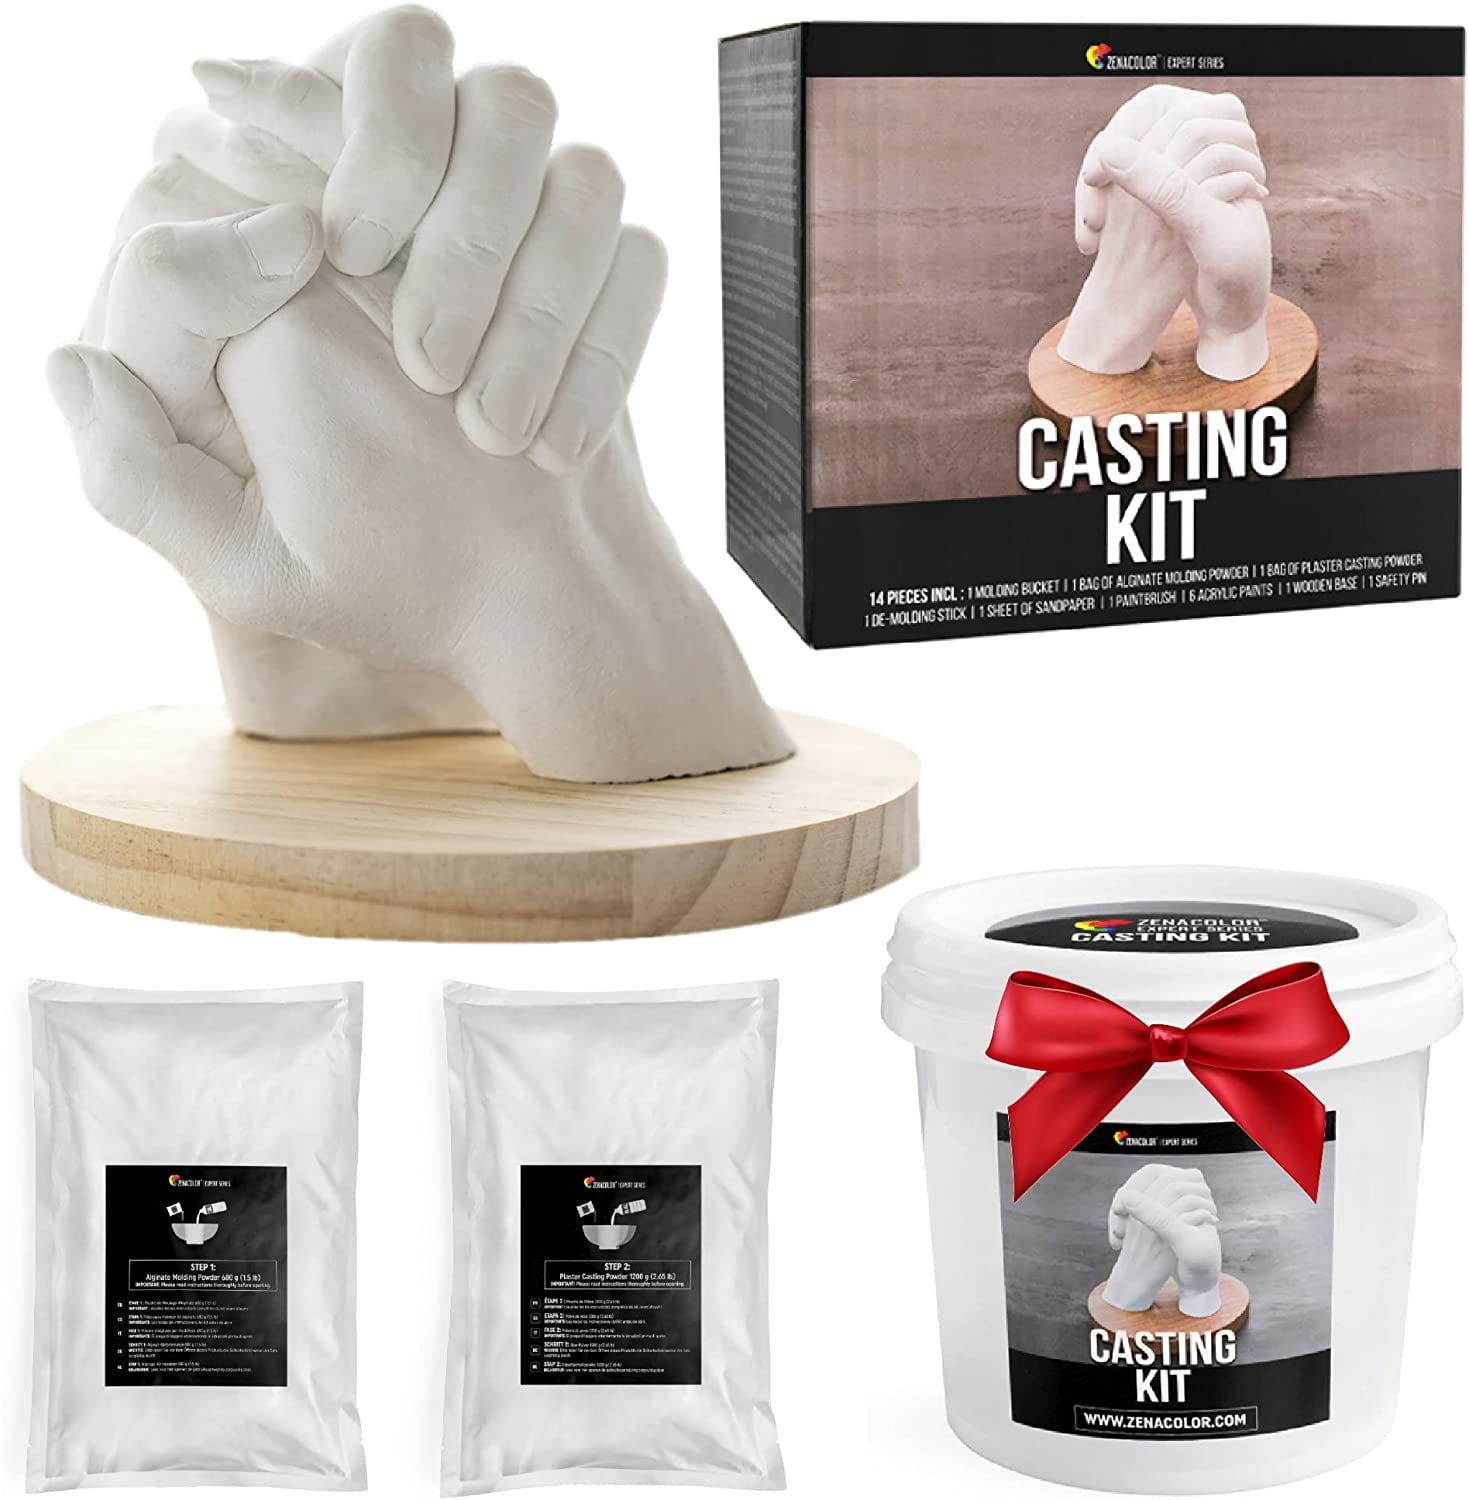 Hand Casting Kit - Complete Hand Molding with Plaster, Bucket, Gloves,  Finishing Tools, Display Stand, Instructions & More! - Hand Mold Kit  Couples 